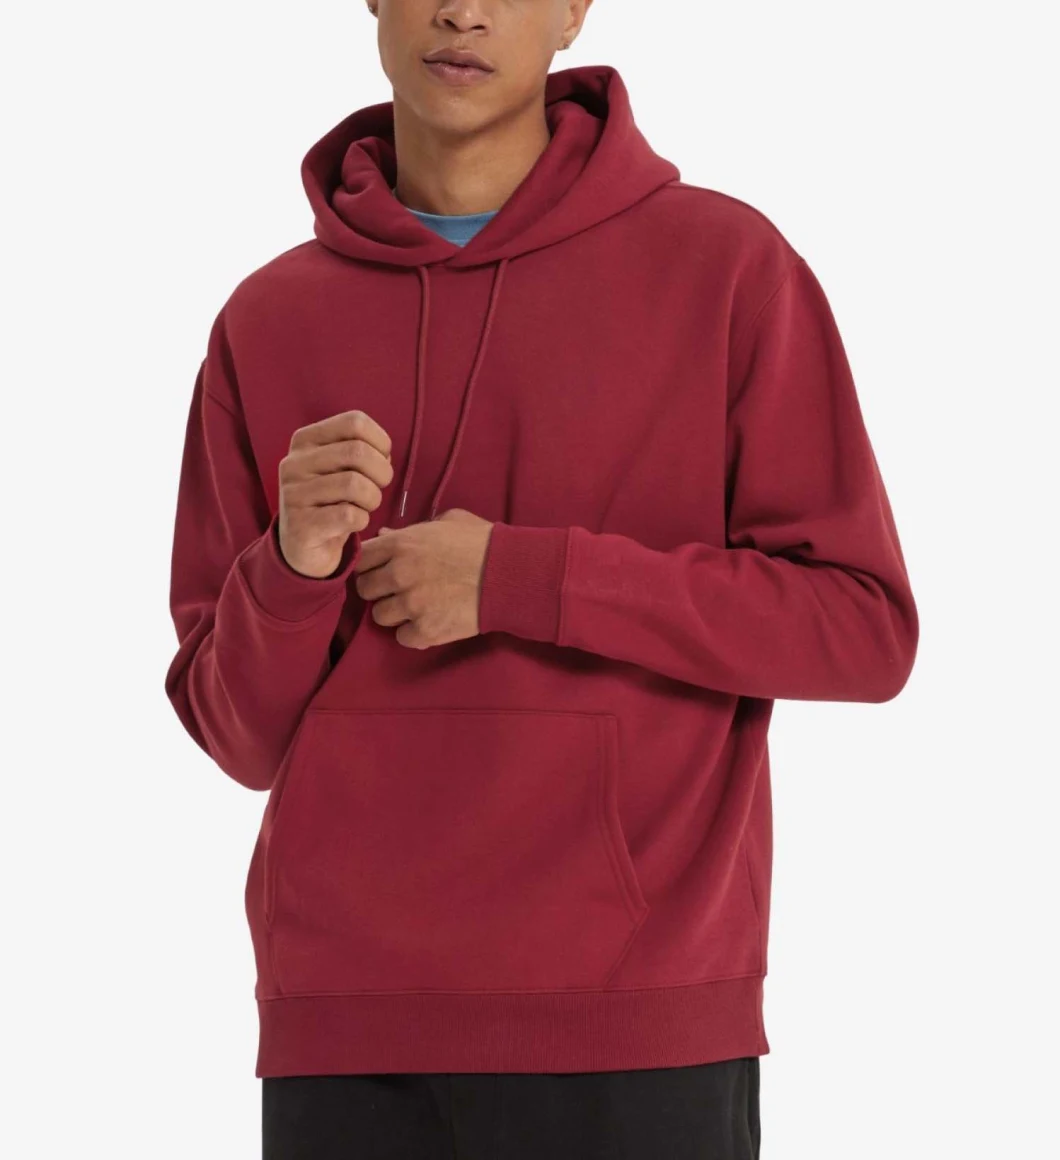 Good Quality Multicolor Custom Clothing Manufacturer Customize Your Own Hoodies